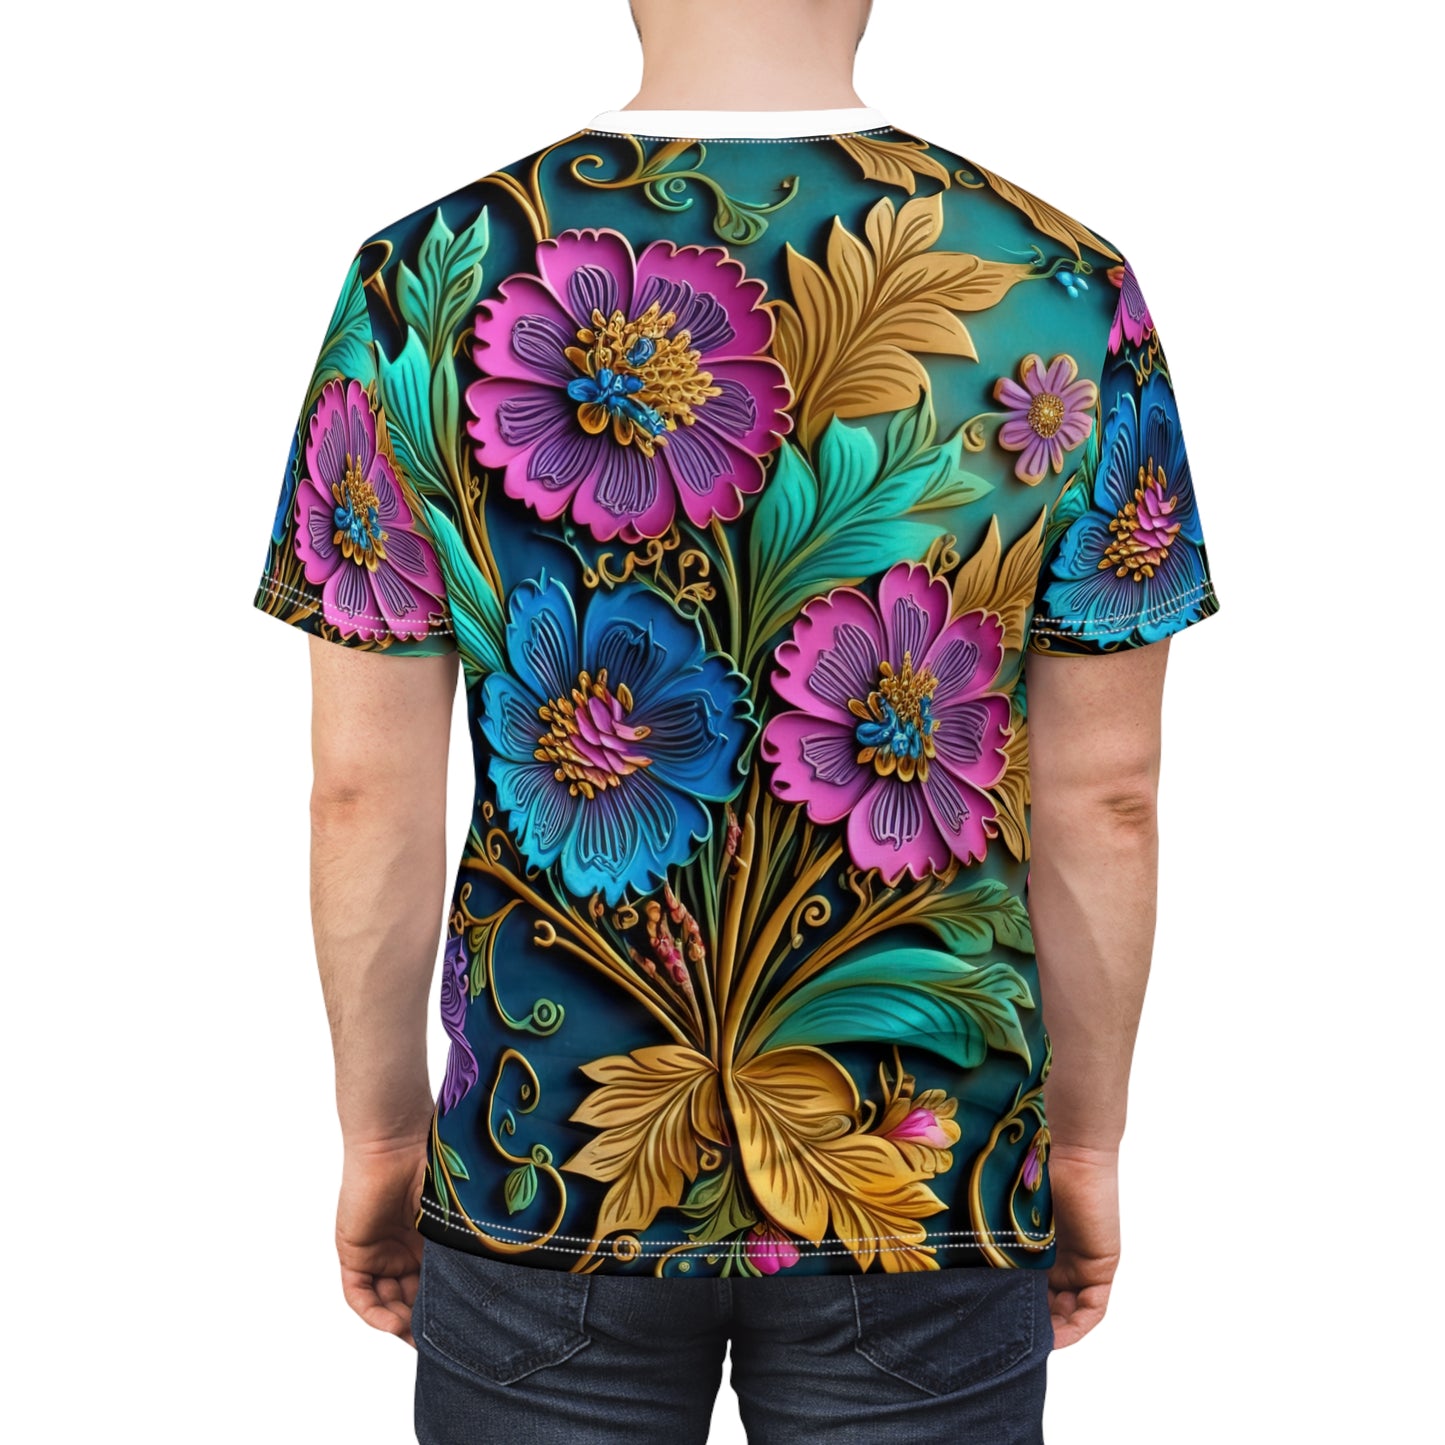 3D Floral Design, Abstract Style,  Unisex Cut & Sew Tee